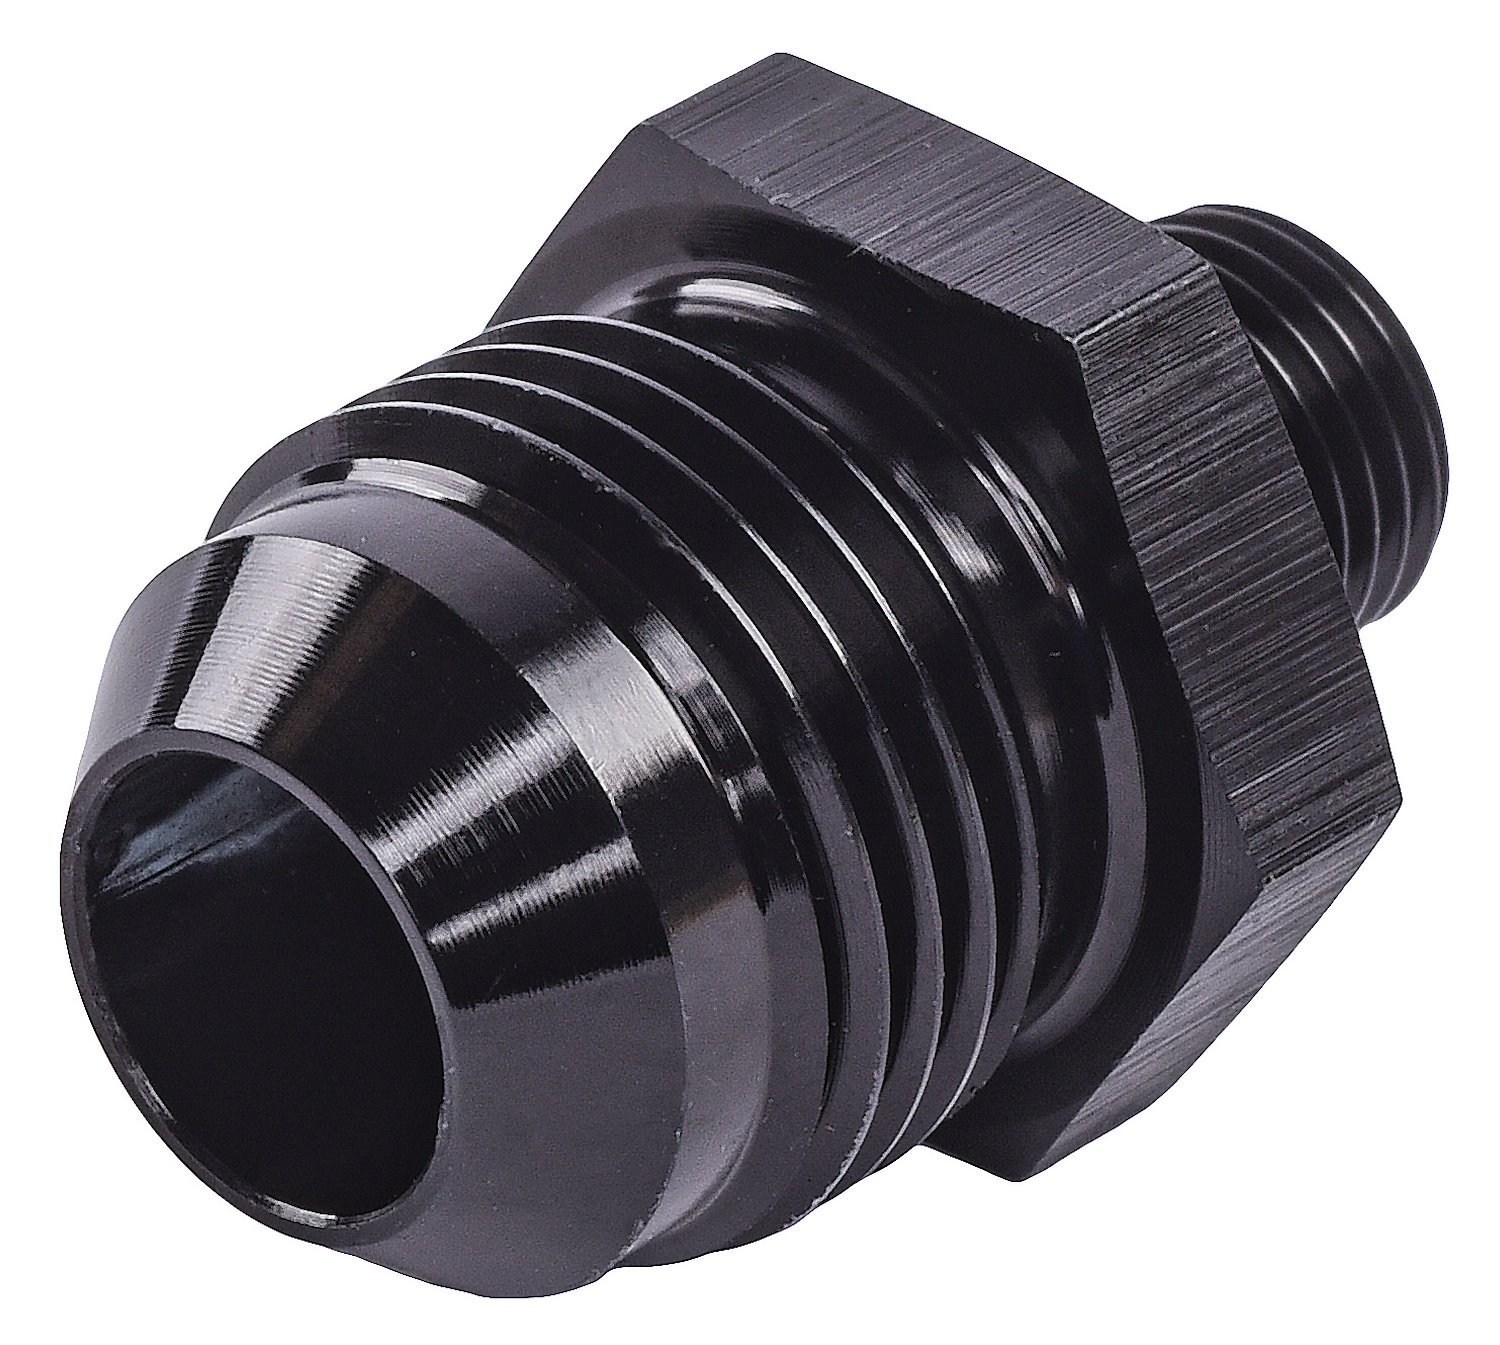 AN to Metric Adapter Fitting [-8 AN Male to 10mm x 1.0 Male, Black]